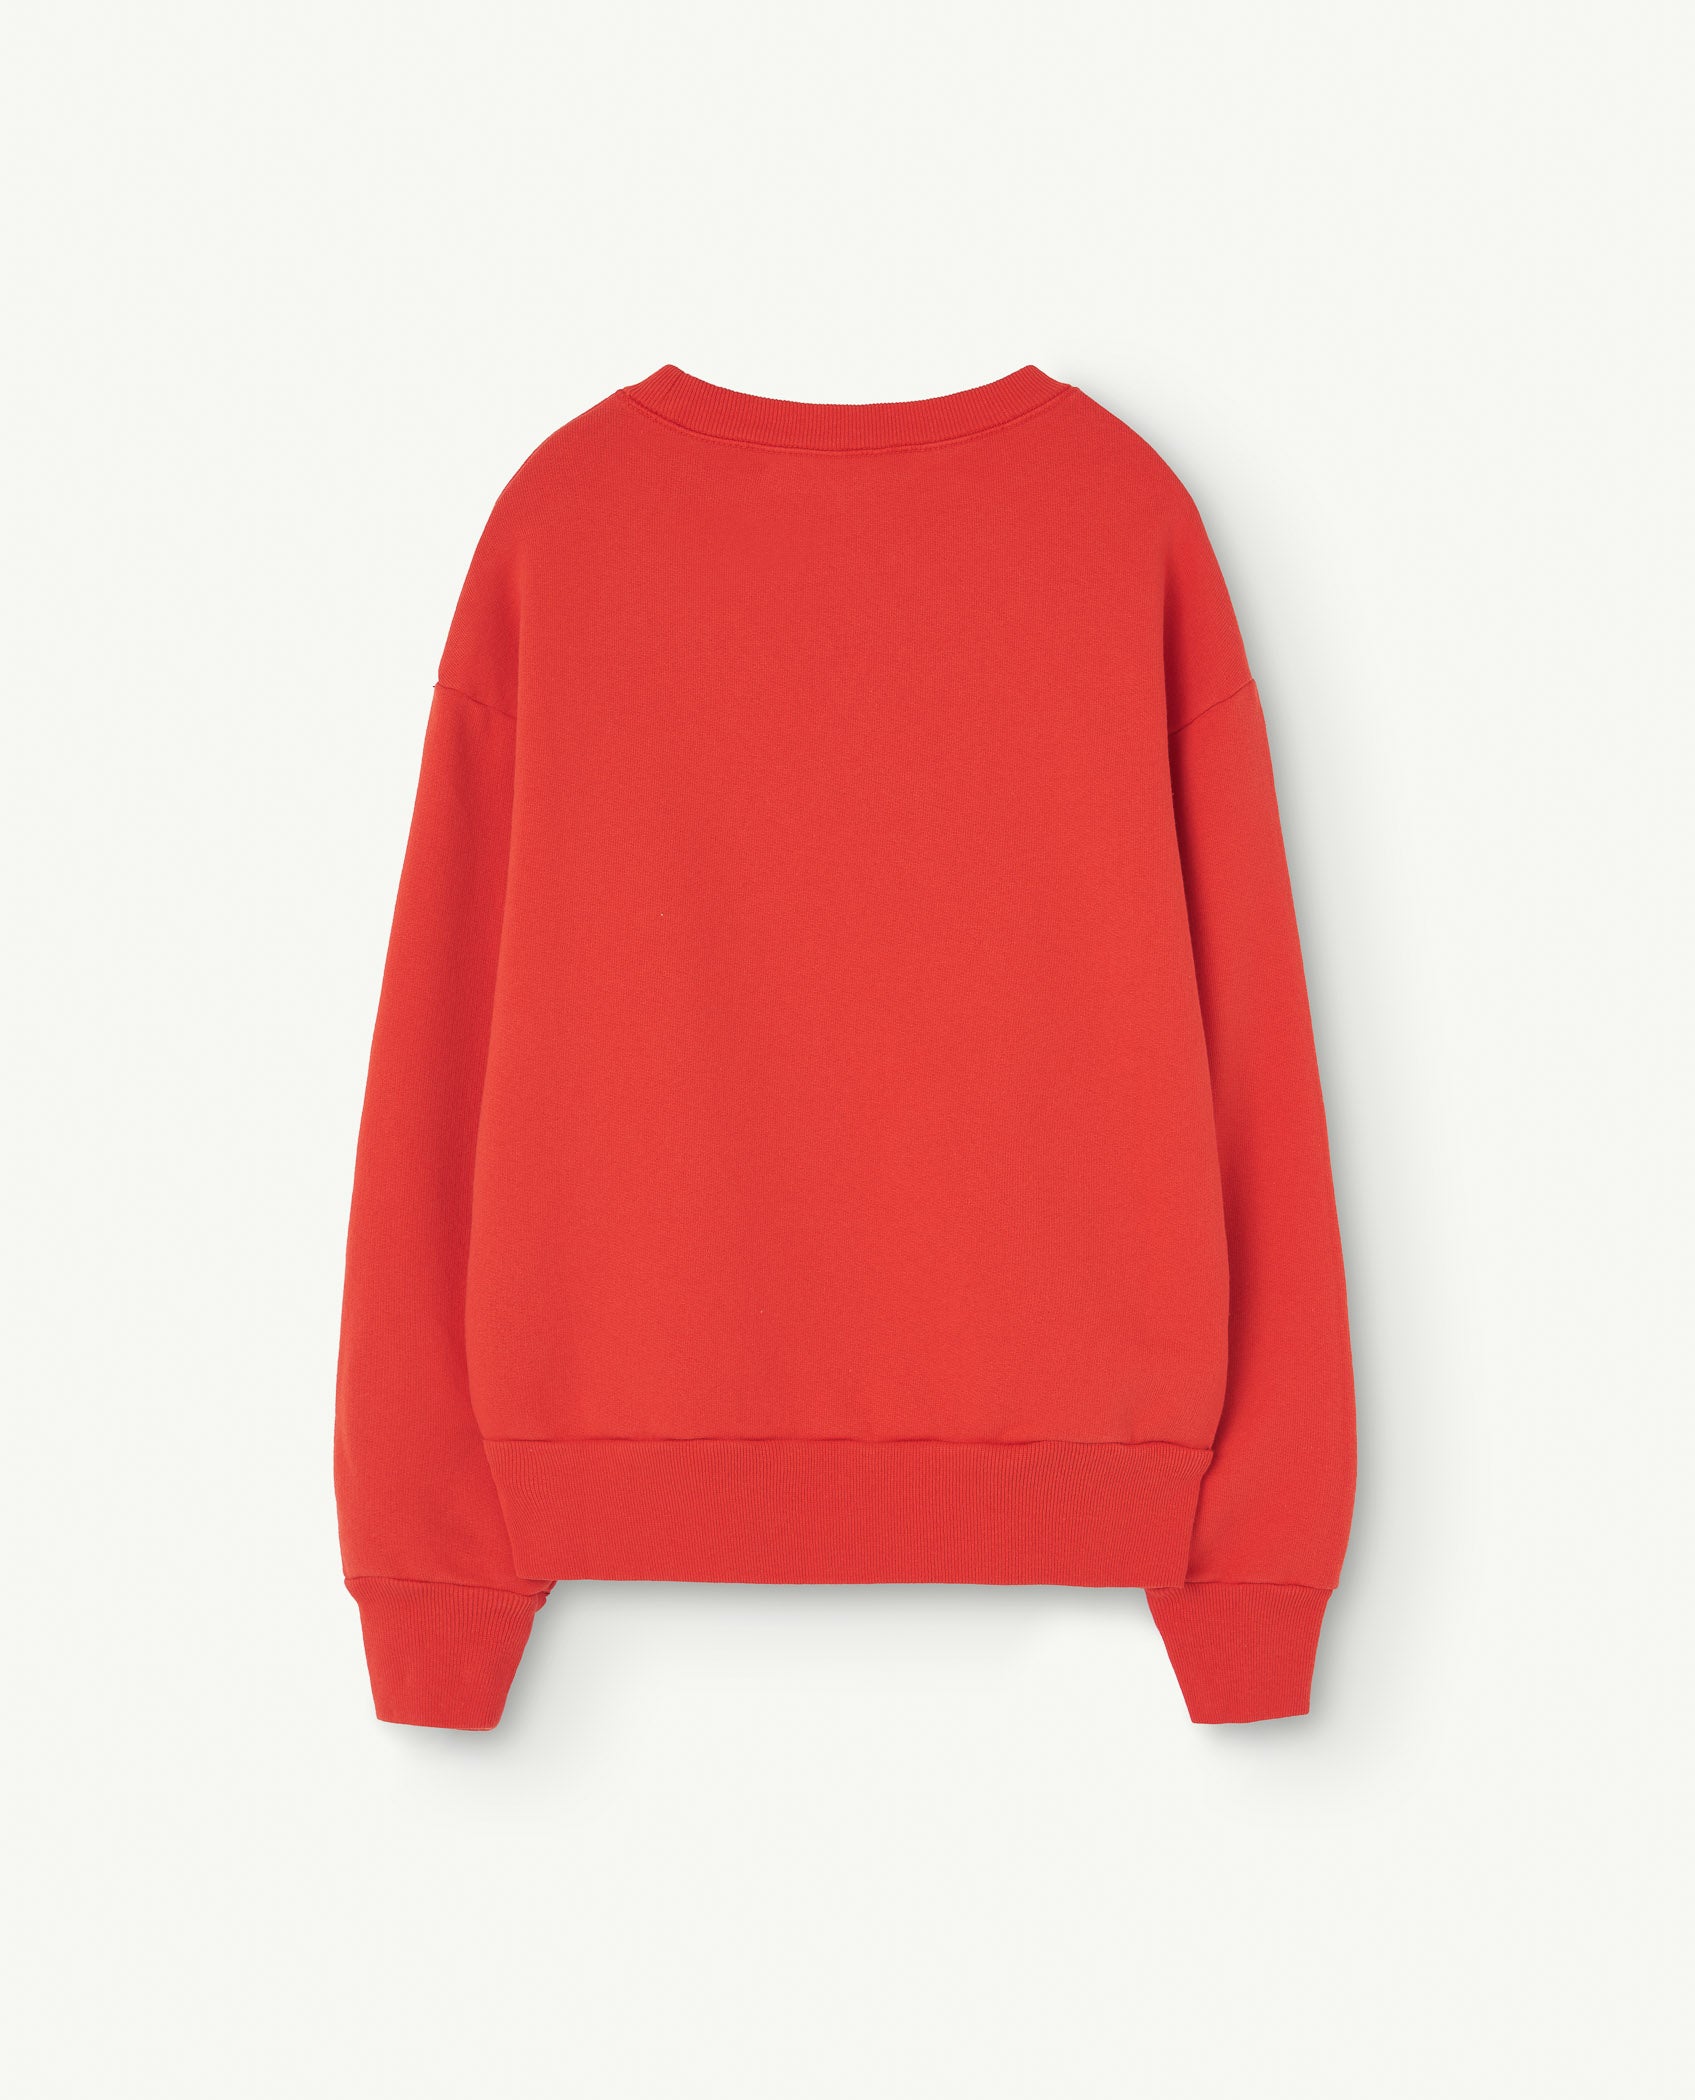 NEW The Animals Observatory | The Billy de Dog Bear Sweatshirt- Red